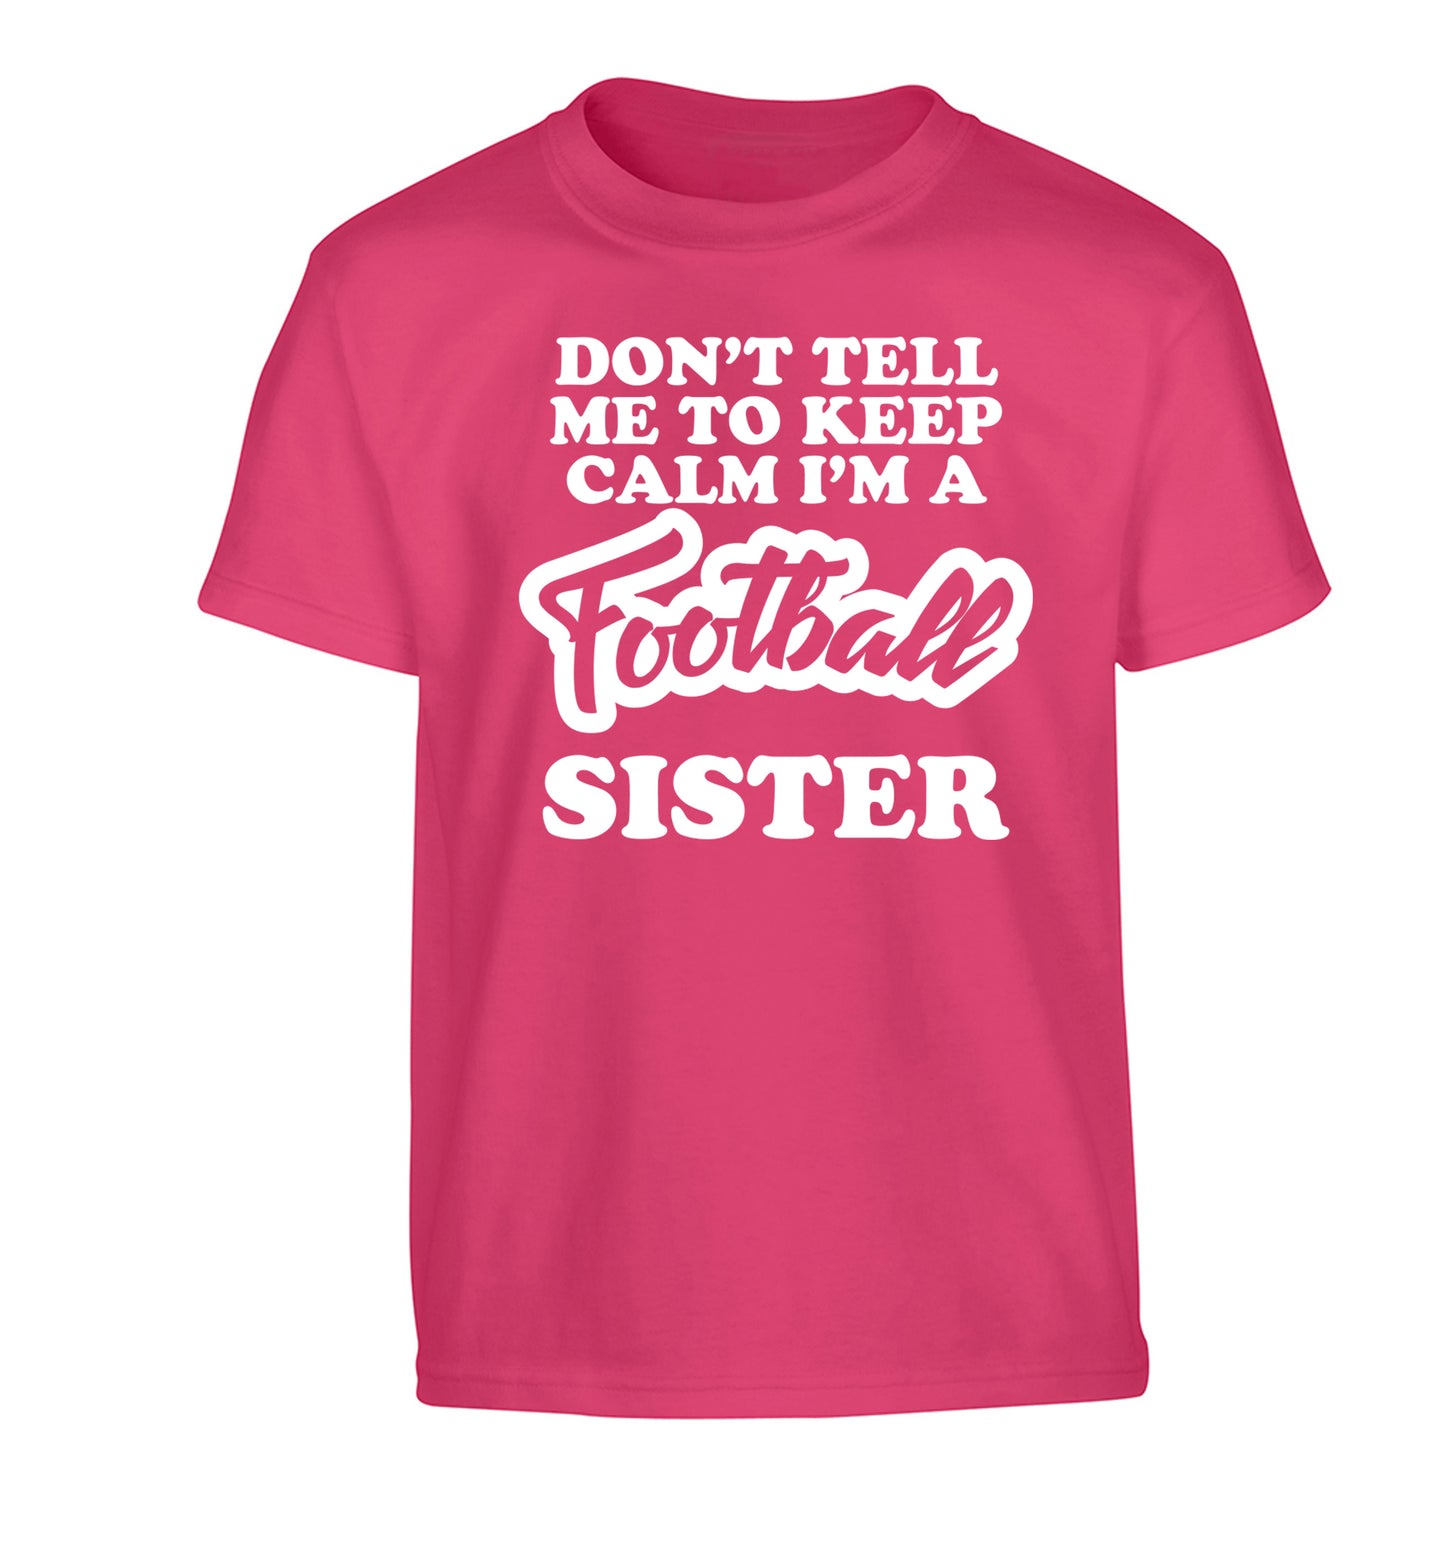 Don't tell me to keep calm I'm a football sister Children's pink Tshirt 12-14 Years